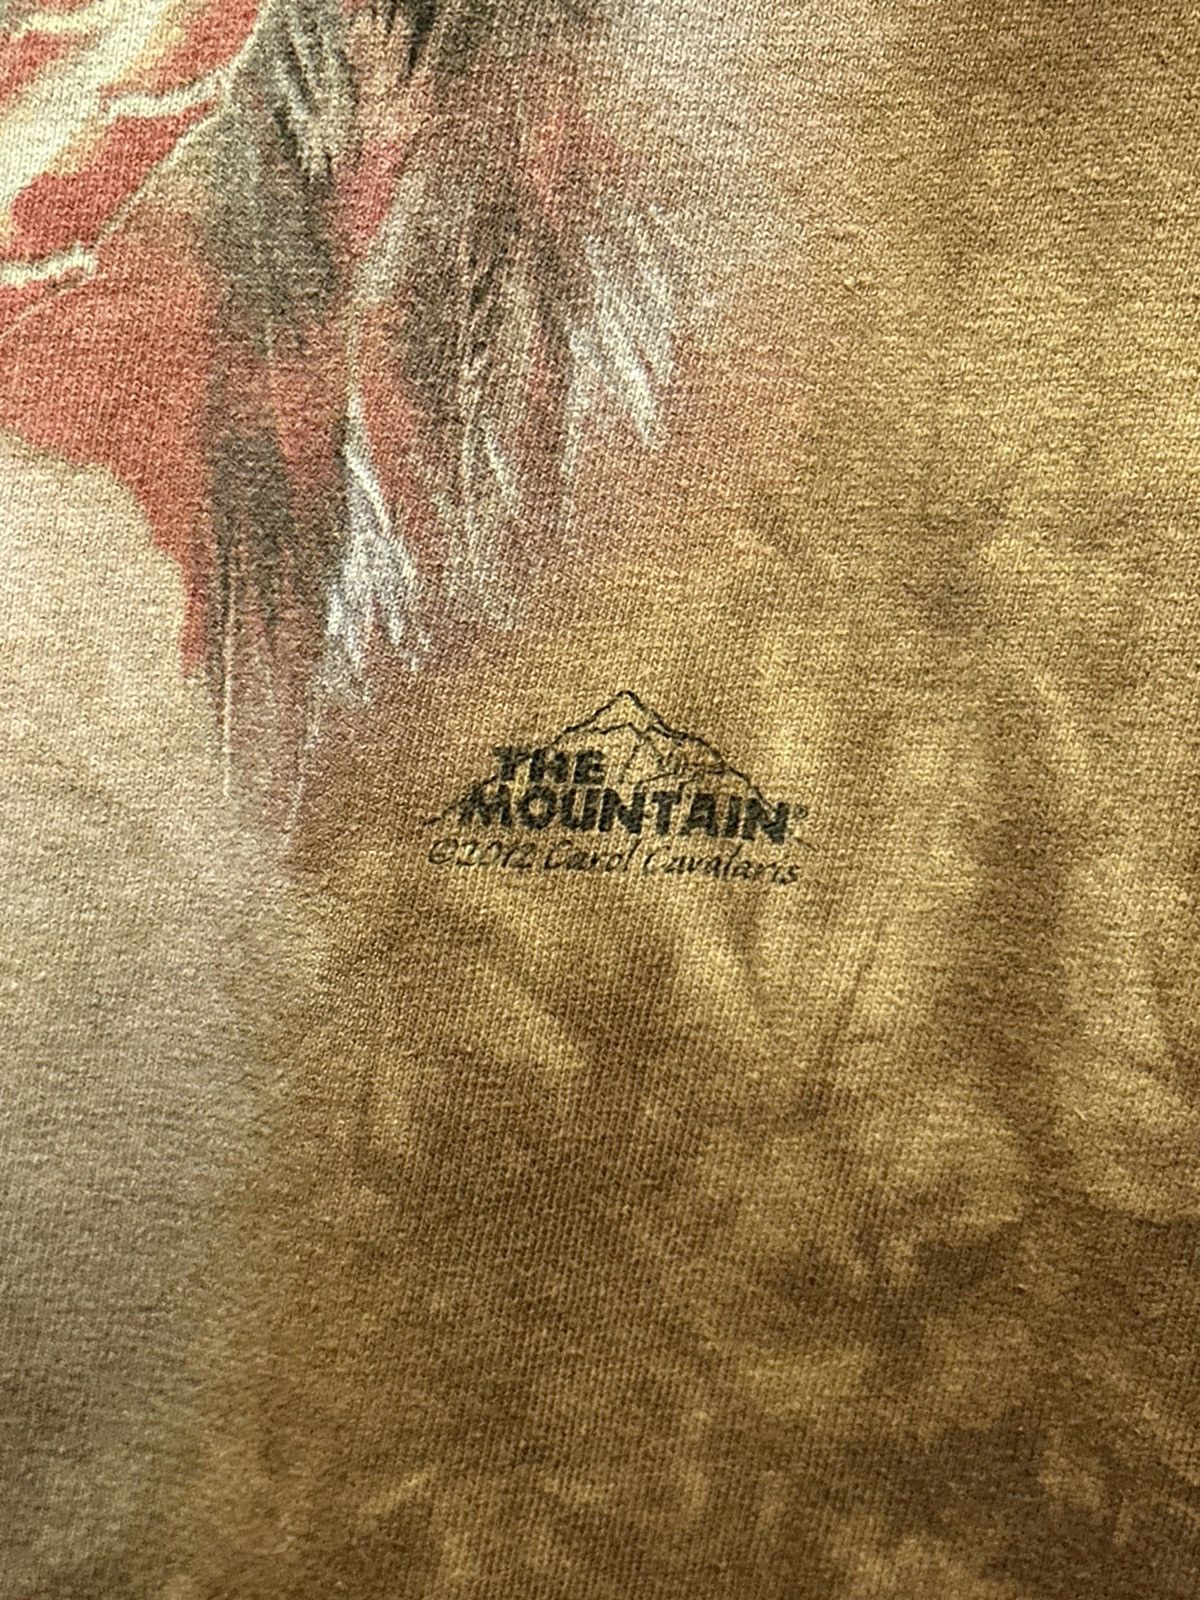 Vintage The Mountain Native American Wolf Nature T-Shirt XL - 4